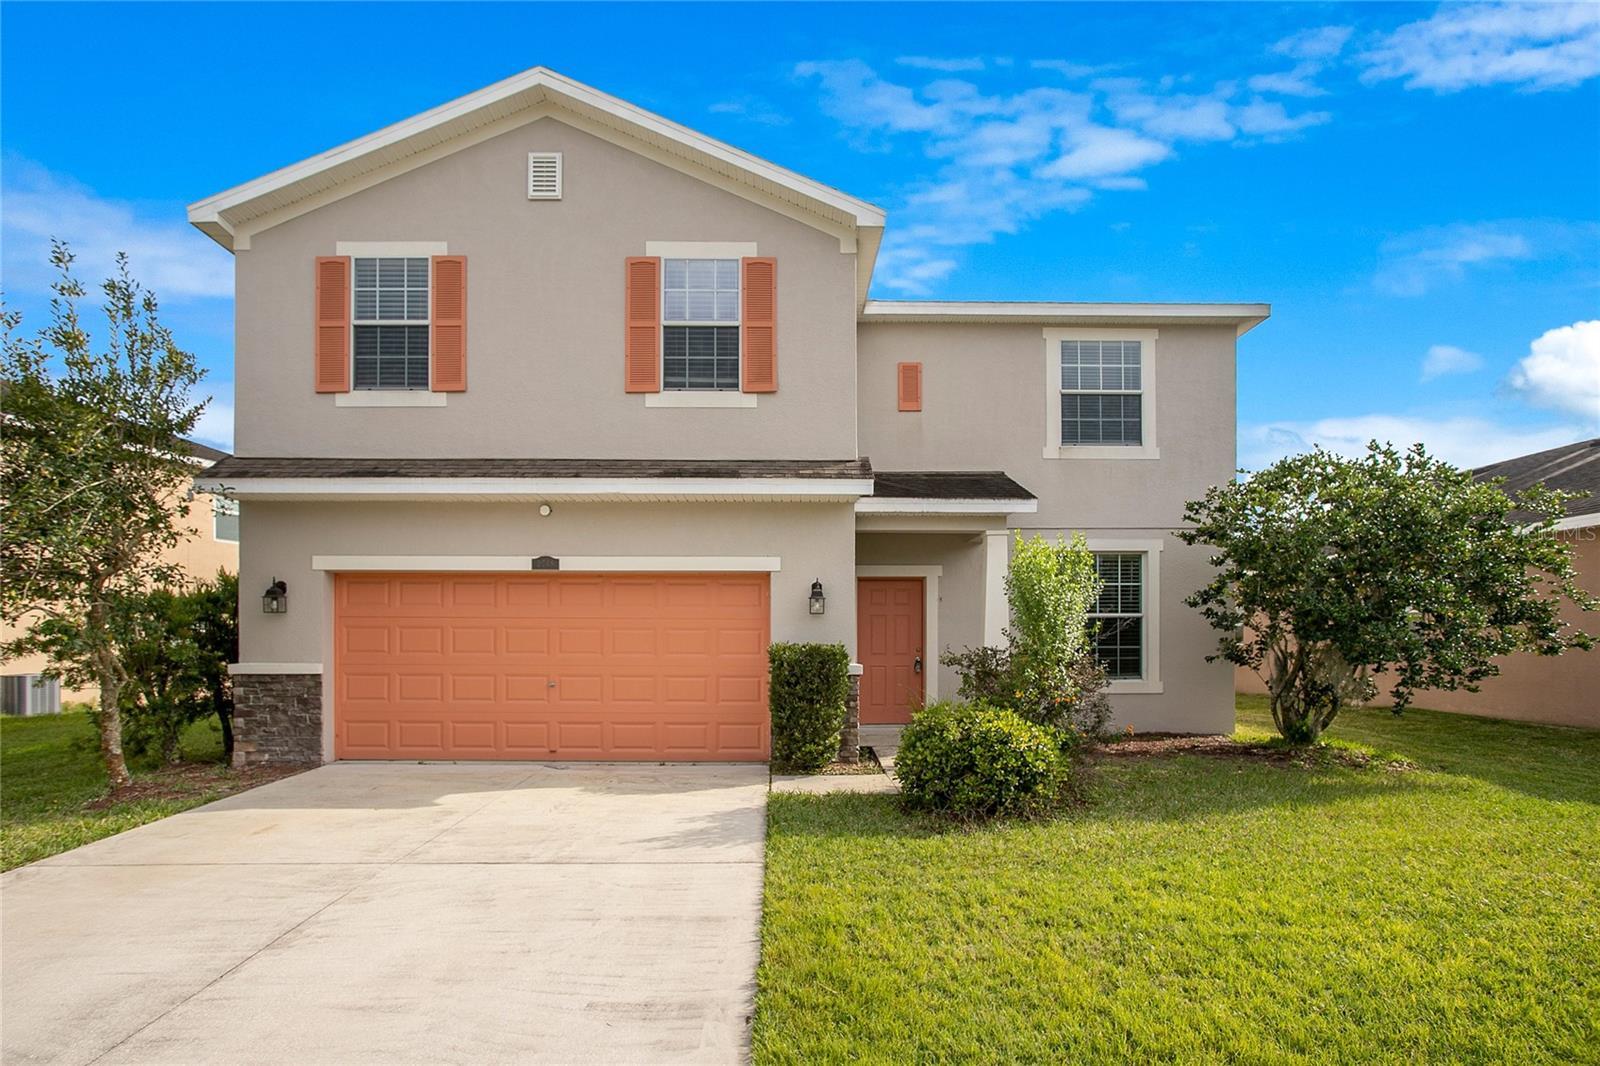 Photo one of 2748 Walden Woods Dr Plant City FL 33566 | MLS O6187232